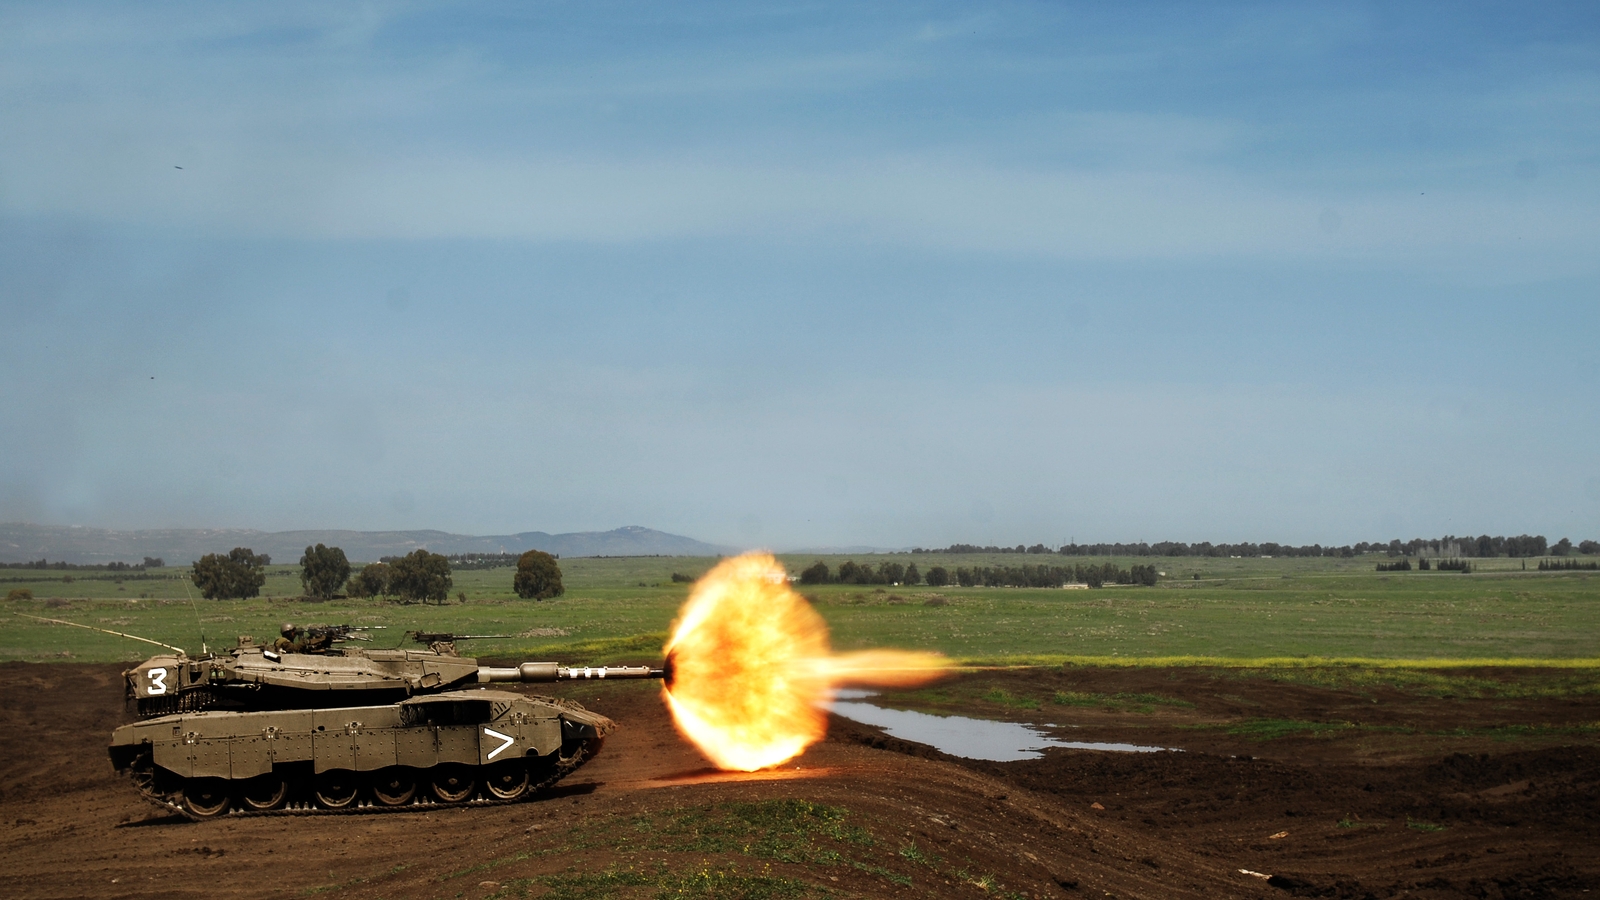 Image: Tank, exercise, shot, fire, flame, sky, field, earth, water, trees